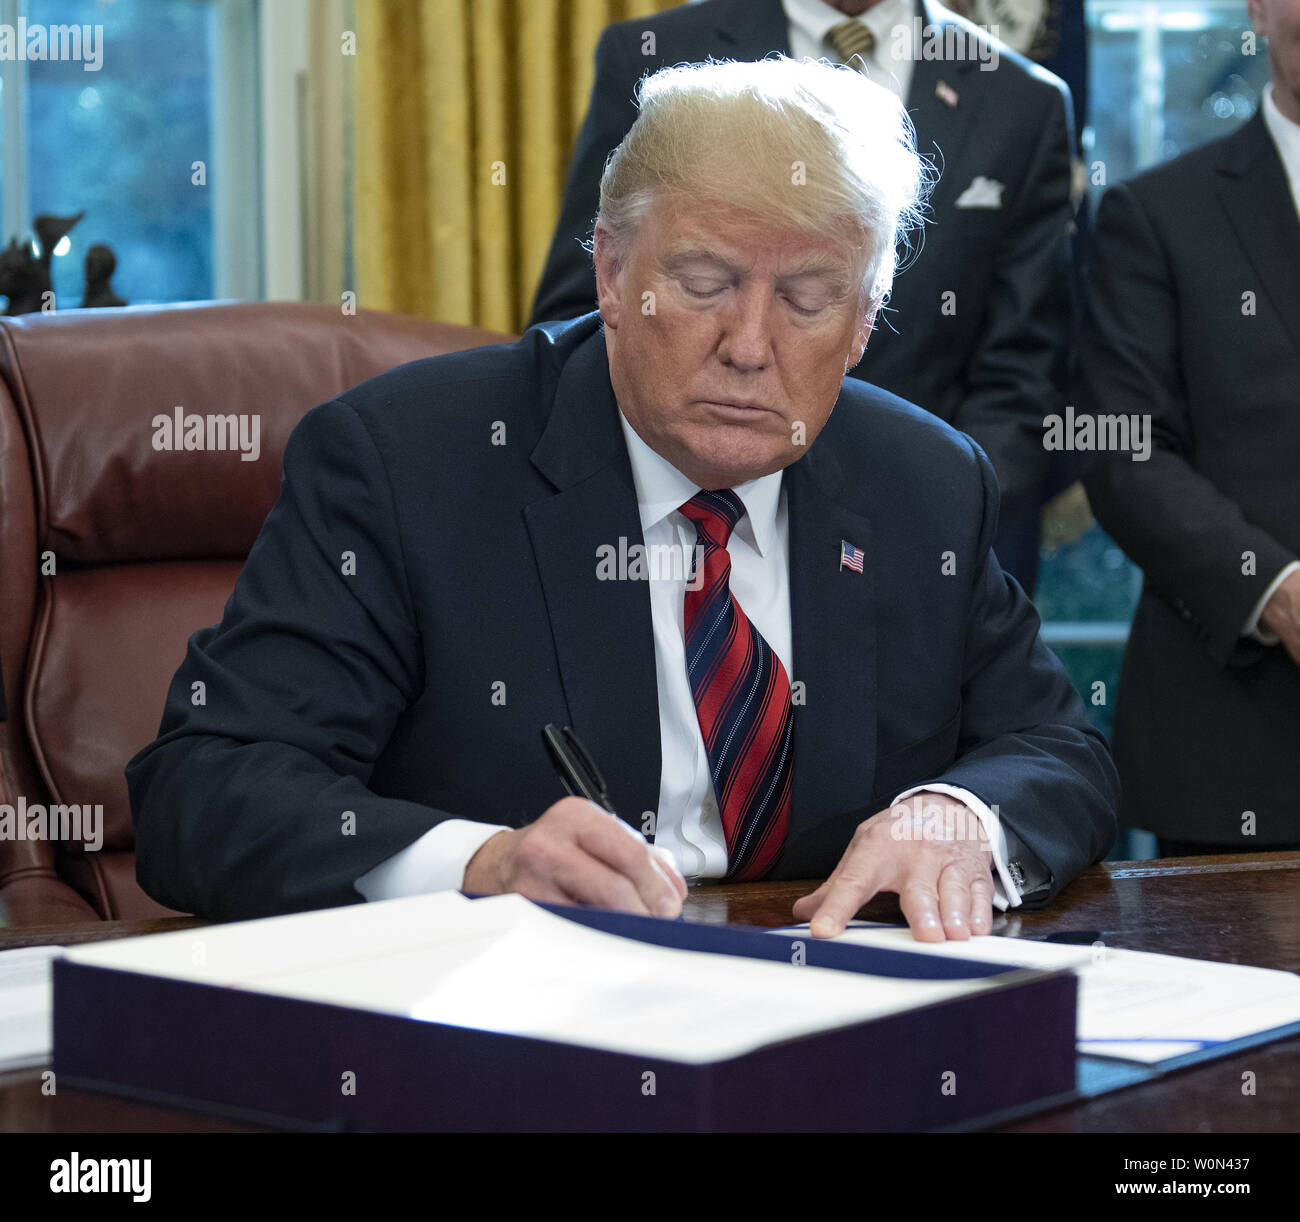 United States President Donald J. Trump signs S.3021, America’s Water Infrastructure Act of 2018 in the Oval Office of the White House in Washington, DC on Tuesday, October 23, 2018.  After signing the bill, the President took questions from the pool on the caravan and Saudi Arabia.       Photo by Ron Sachs/UPI Stock Photo